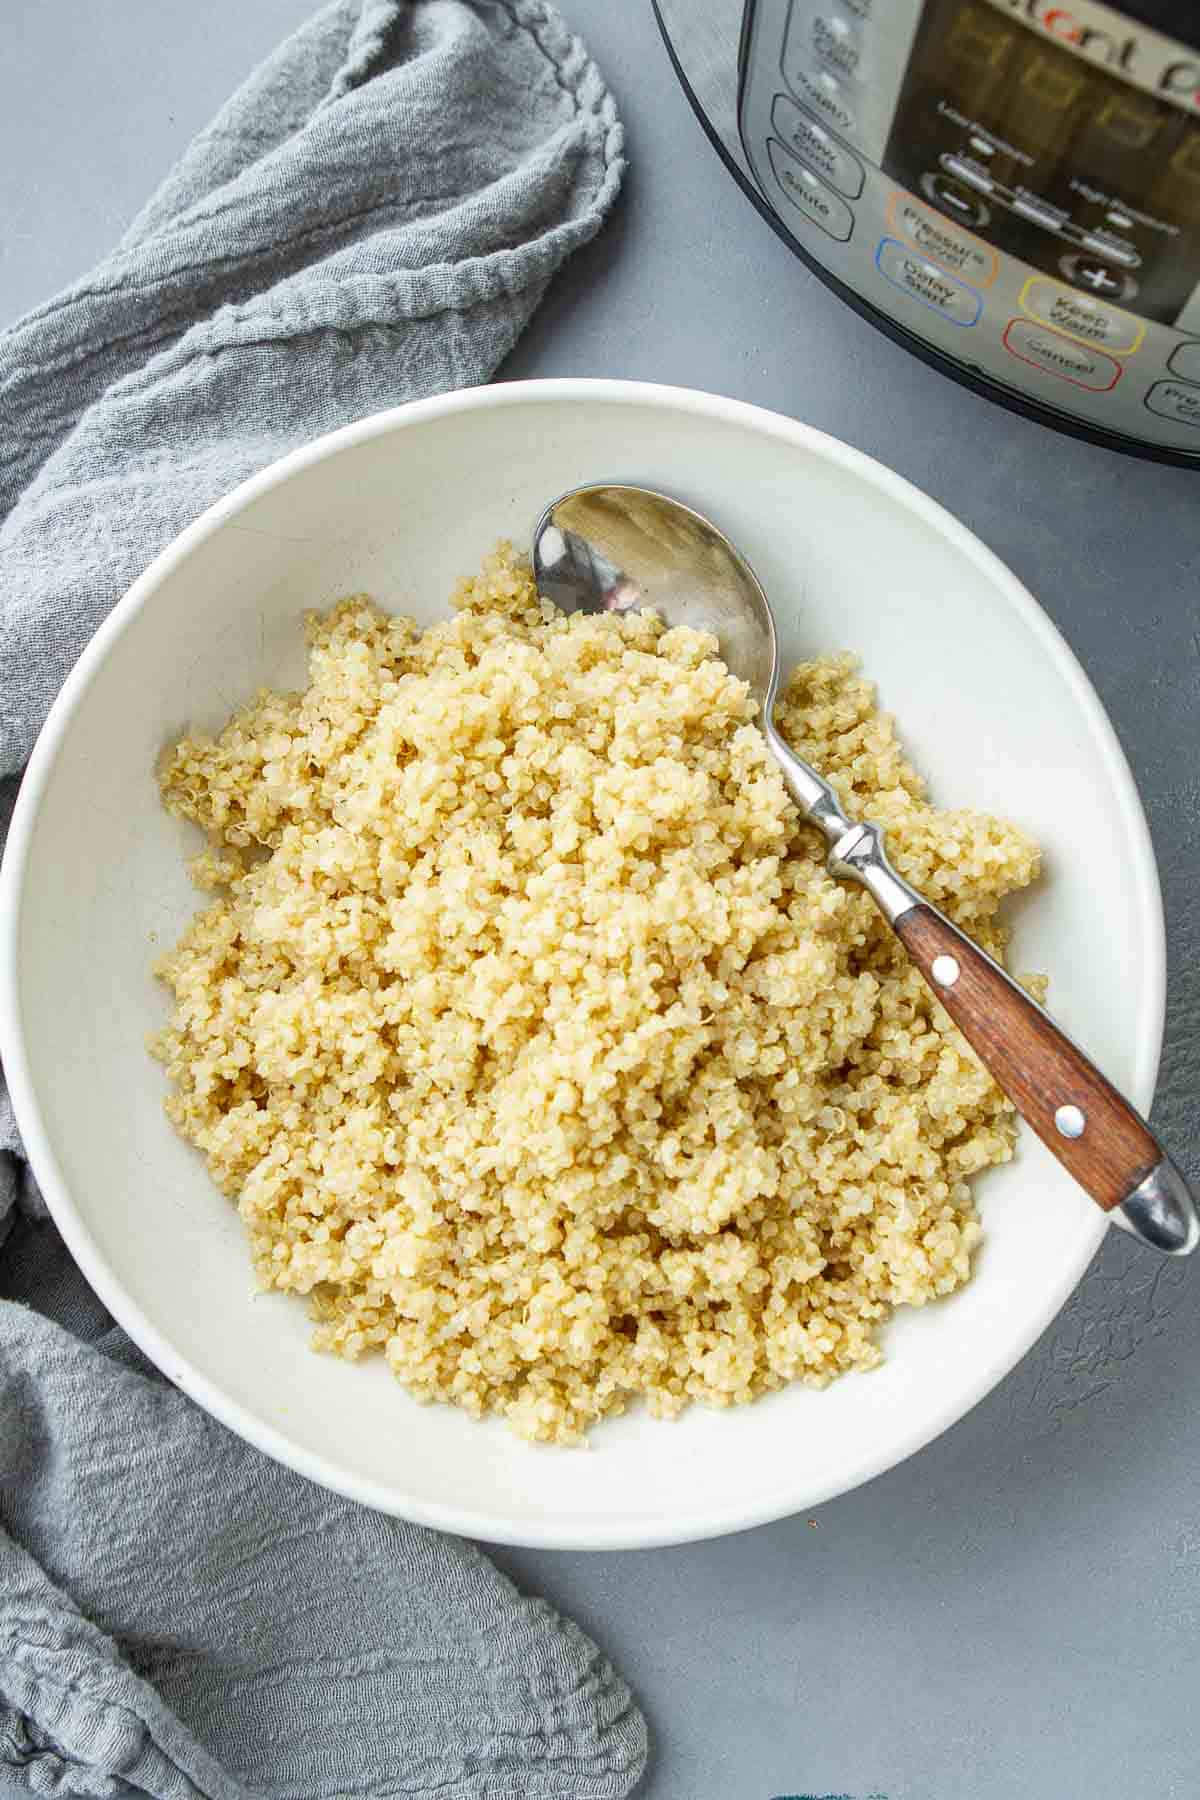 Instant Pot Quinoa is quick and easy to make. Use it in soups, stews, salads and sides. Easy to freeze! | Meal prep | Recipes easy | Healthy | Pressure Cooker